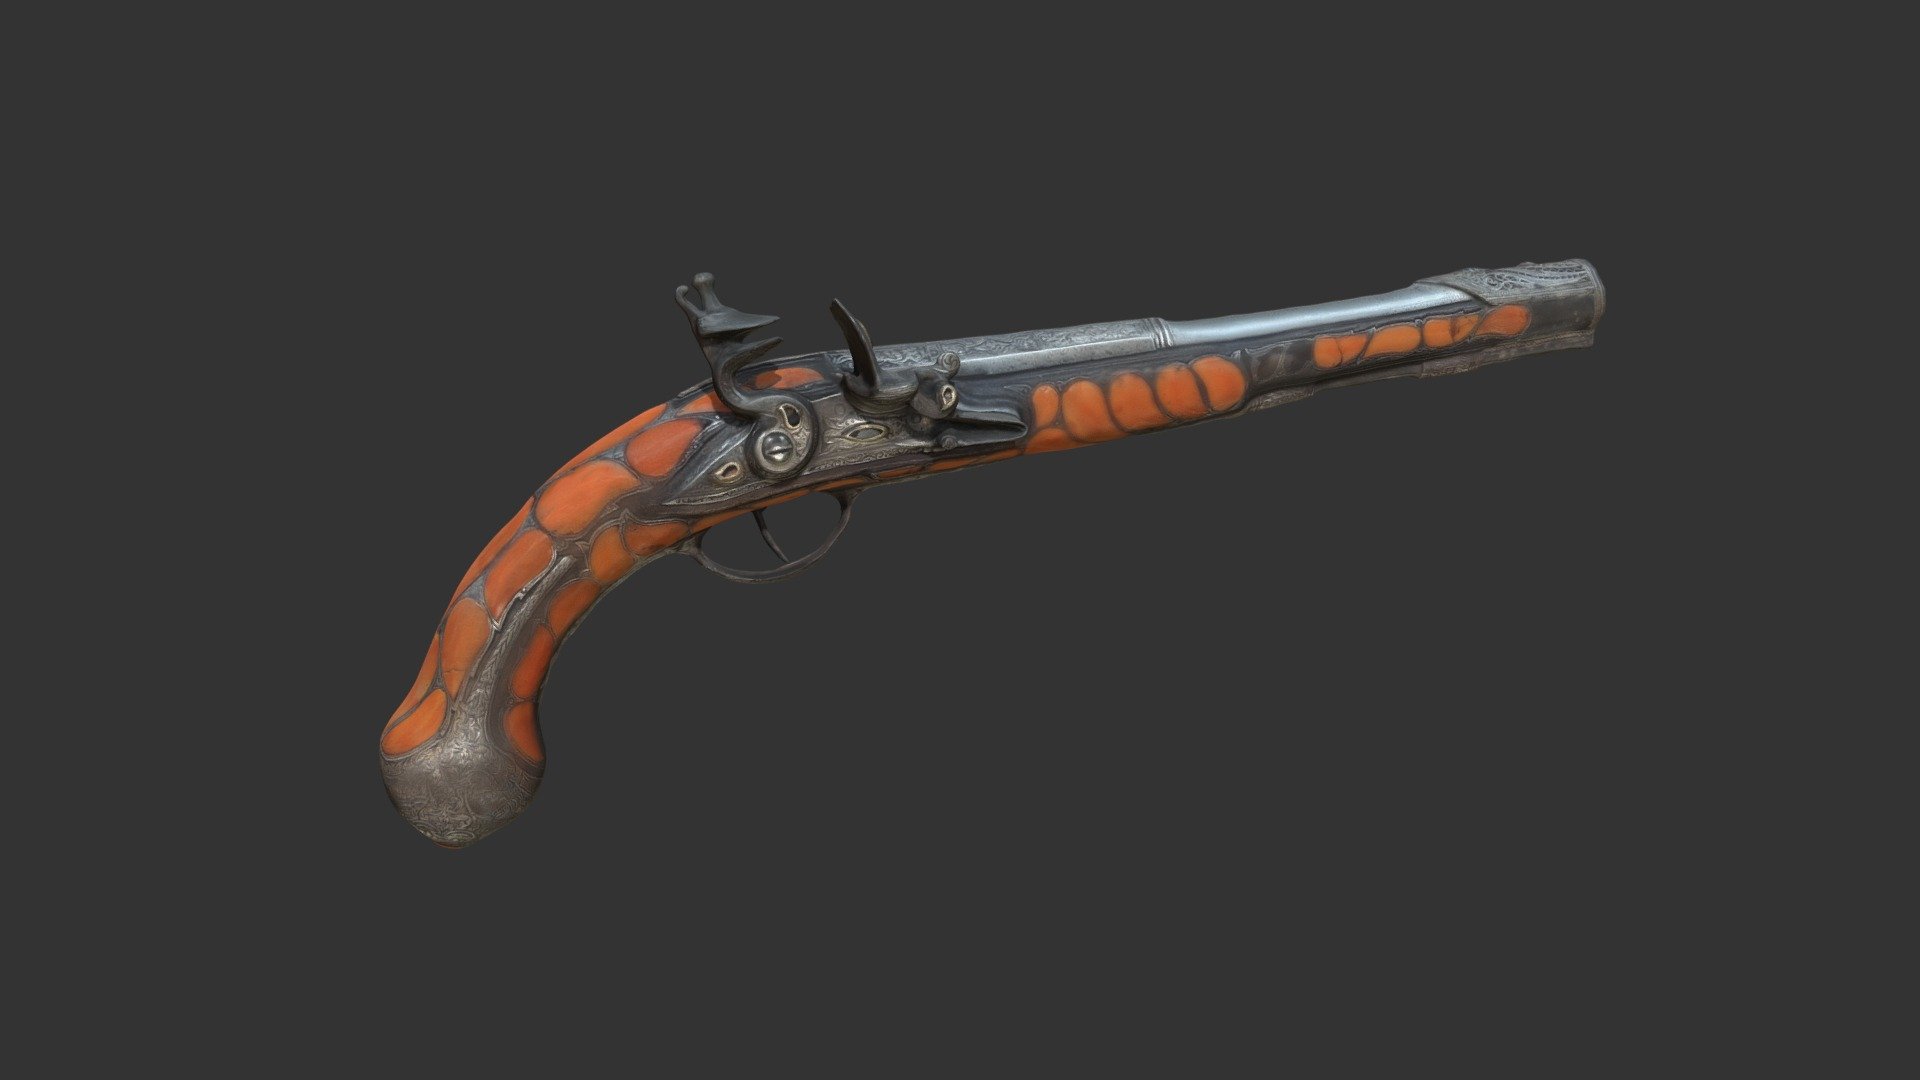 Modeled for Tula State Arms Museum
https://sketchfab.com/models/792ca024195d4292829d8d0b304ced30#
https://twitter.com/M_Kadilnikov
Pistols made in the Balkans, differed by narrower elongated handle with knob shaped “apple”, while the grip “apples” of the Turkish guns were of a more round shape.

Country: Ottoman Empire, Balkans

Time of production: XVII-XIX c.

Material: Steel, wood

Decoration technique: Embossing, inlay, filigree

Caliber, mm: 17

Total length, cm: 45,5

Barrel length, cm: 30,5

Weight, kg: 2,4 - Flintlock Pistol - Download Free 3D model by Mikhail Kadilnikov (@MikhailKadilnikov) 3d model